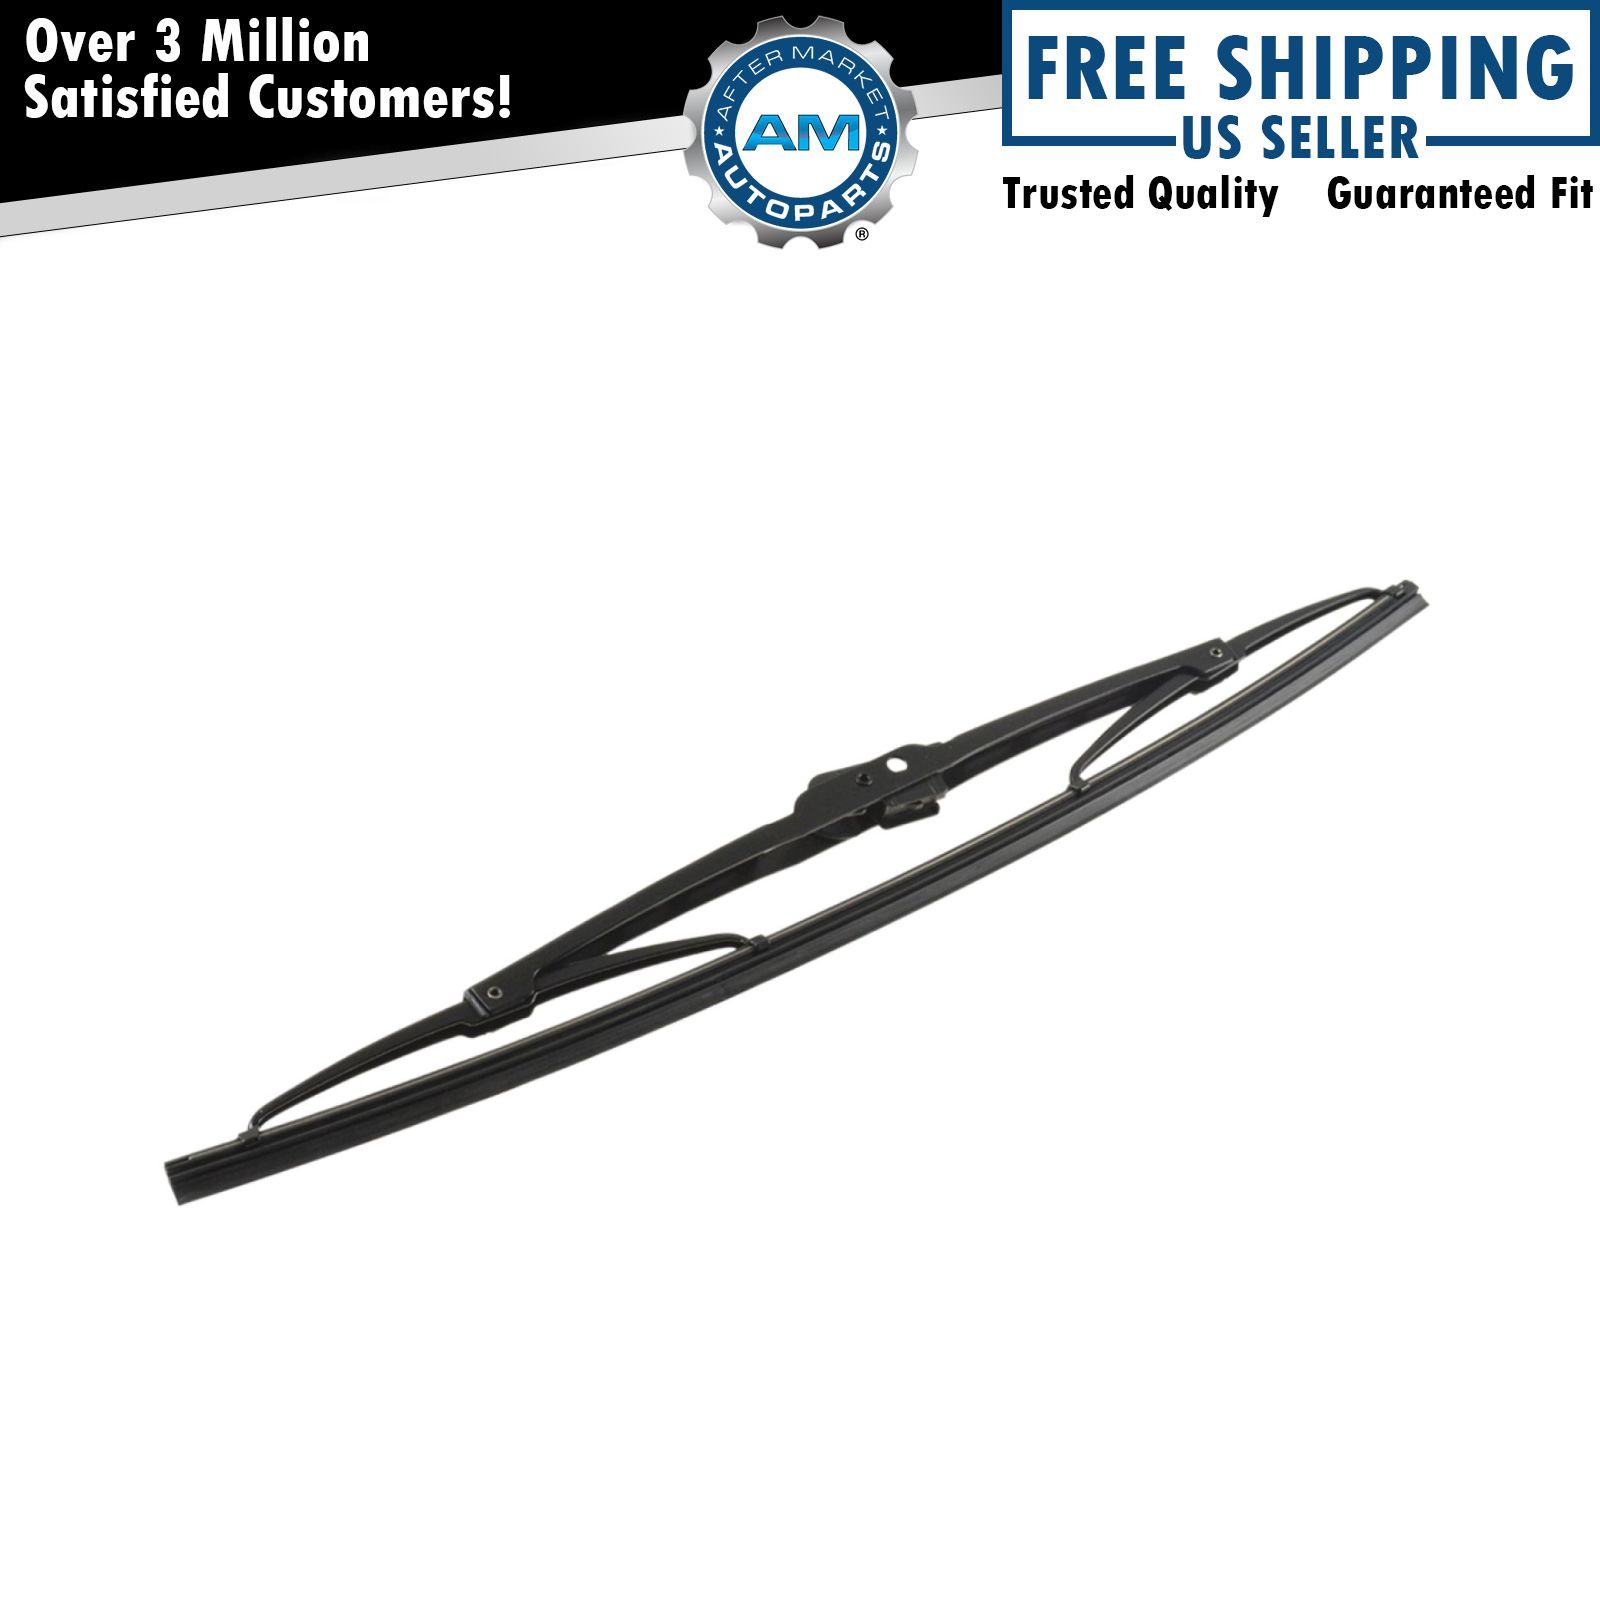 OEM Mopar 1AMWC016AA Wiper Blade 16" for Dodge Chrysler | eBay 2004 Chrysler Town And Country Wiper Blade Size